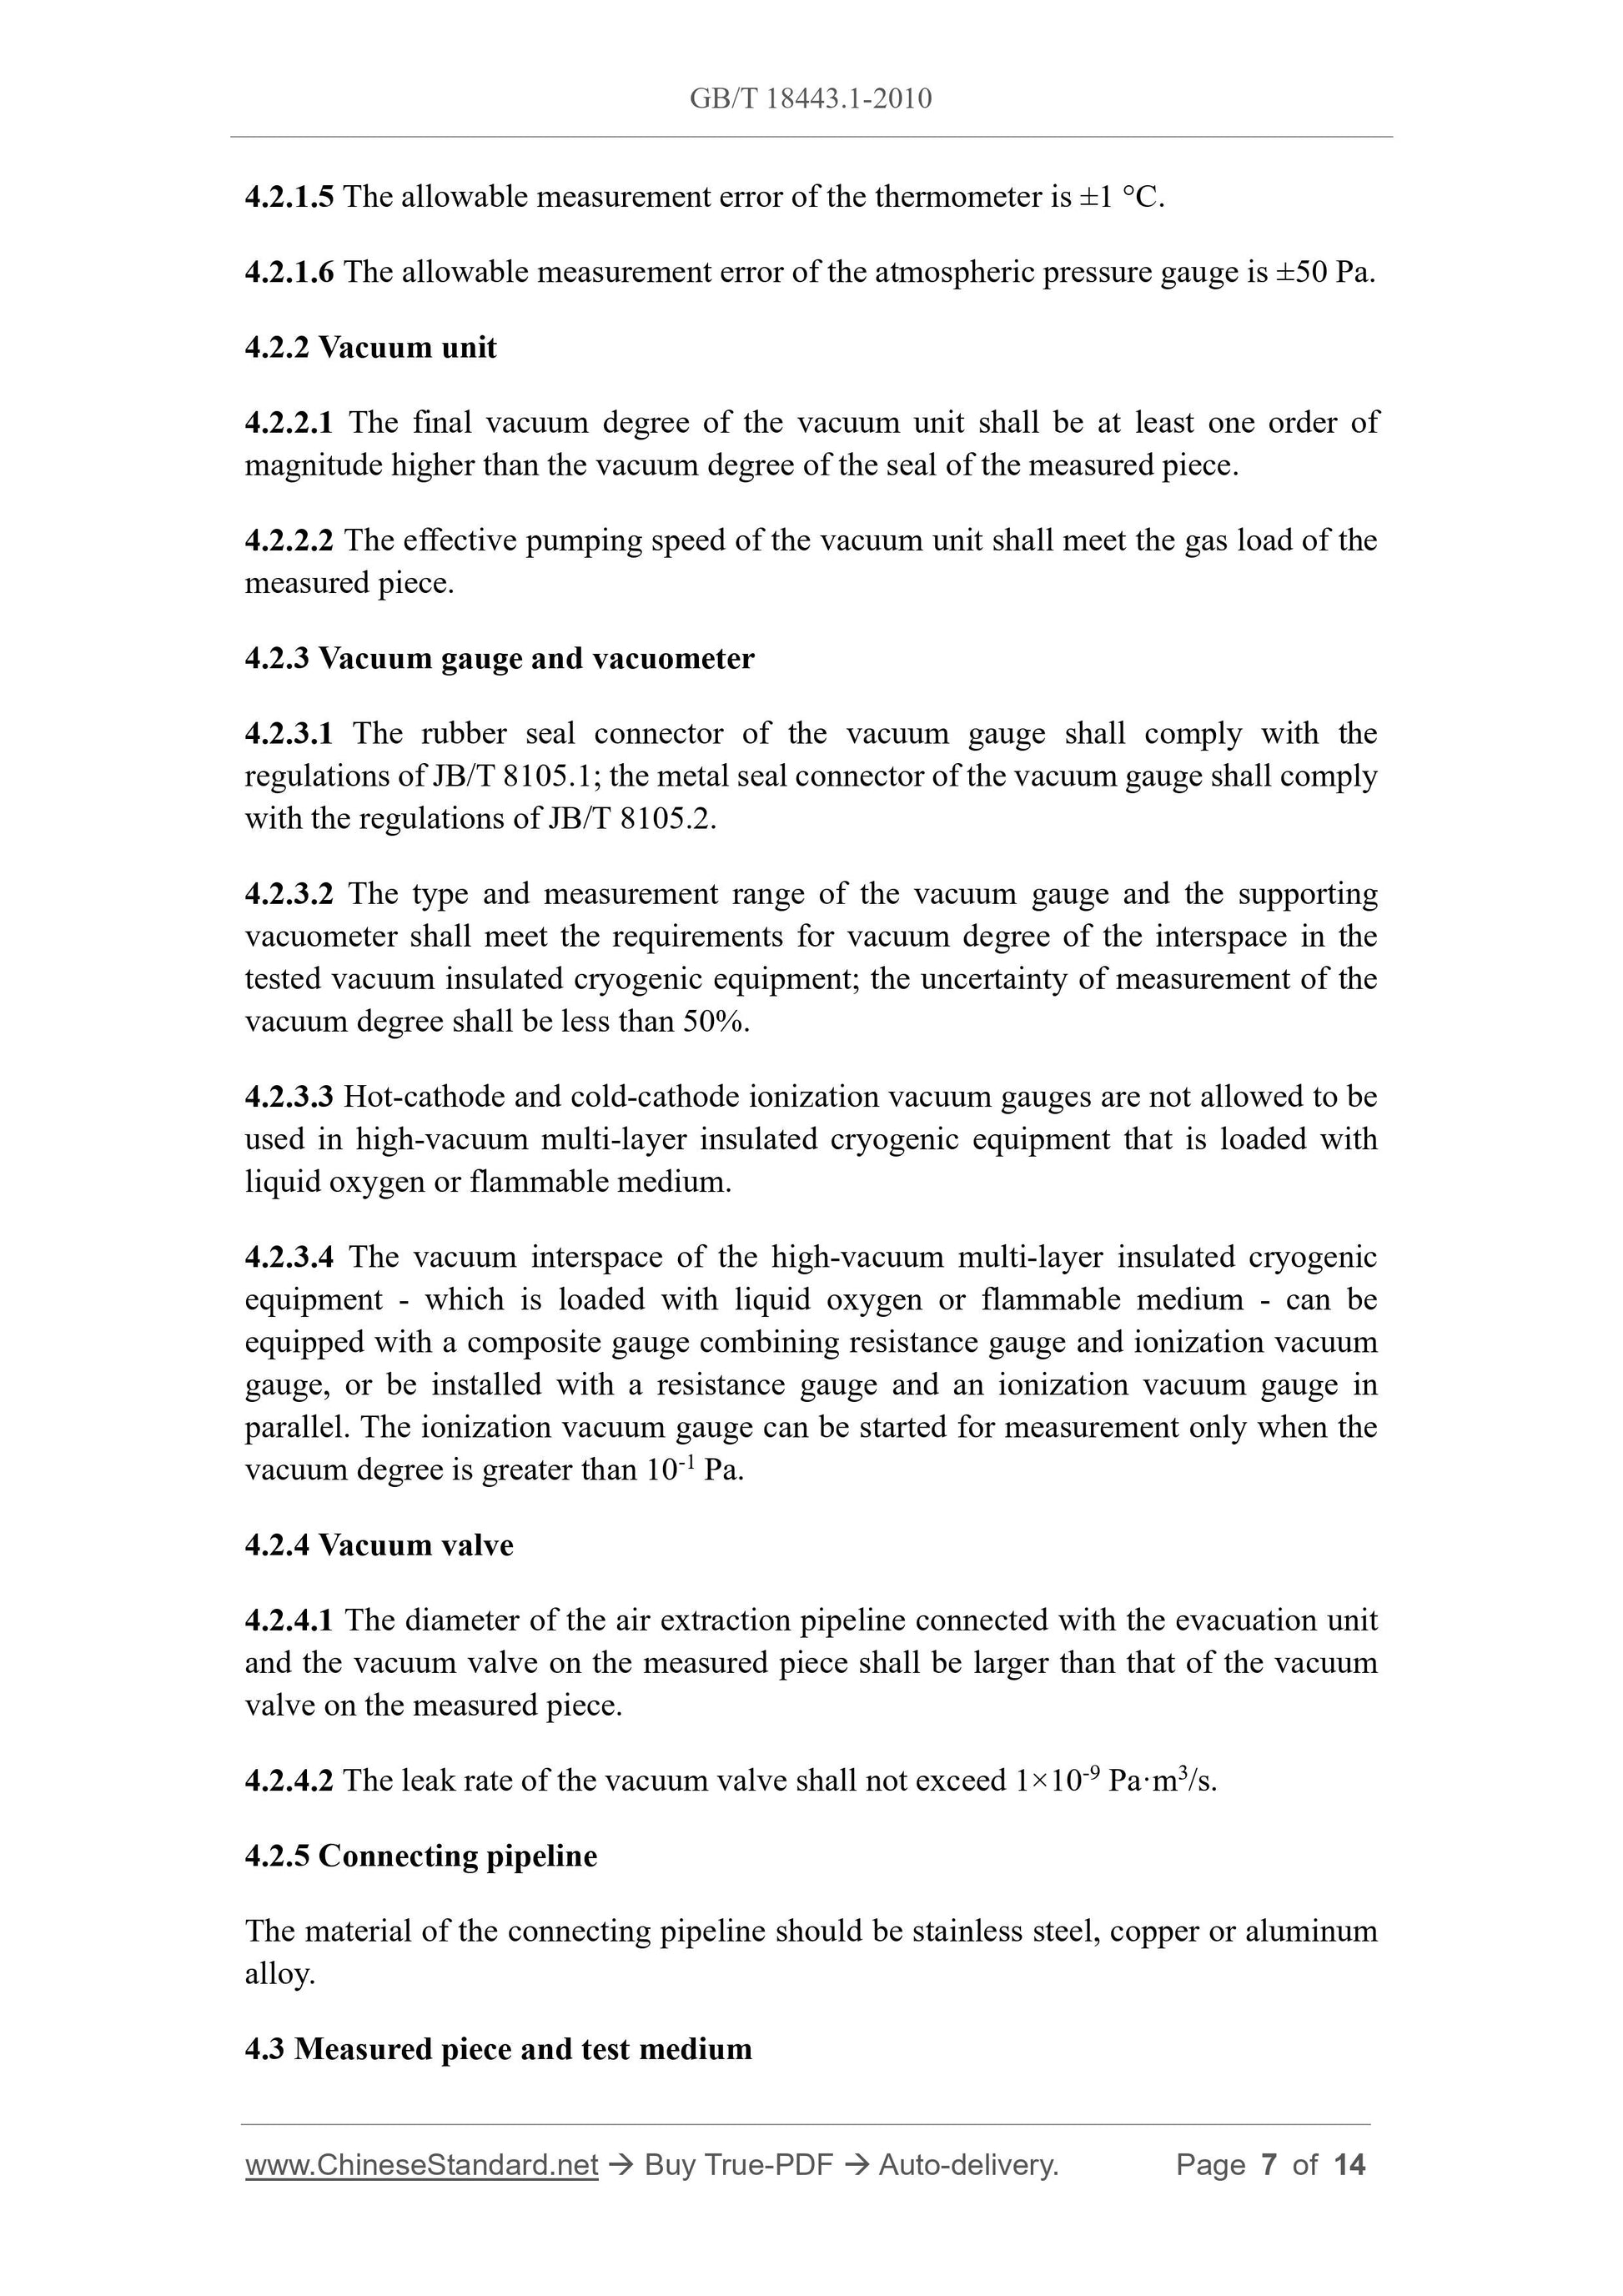 GB/T 18443.1-2010 Page 5